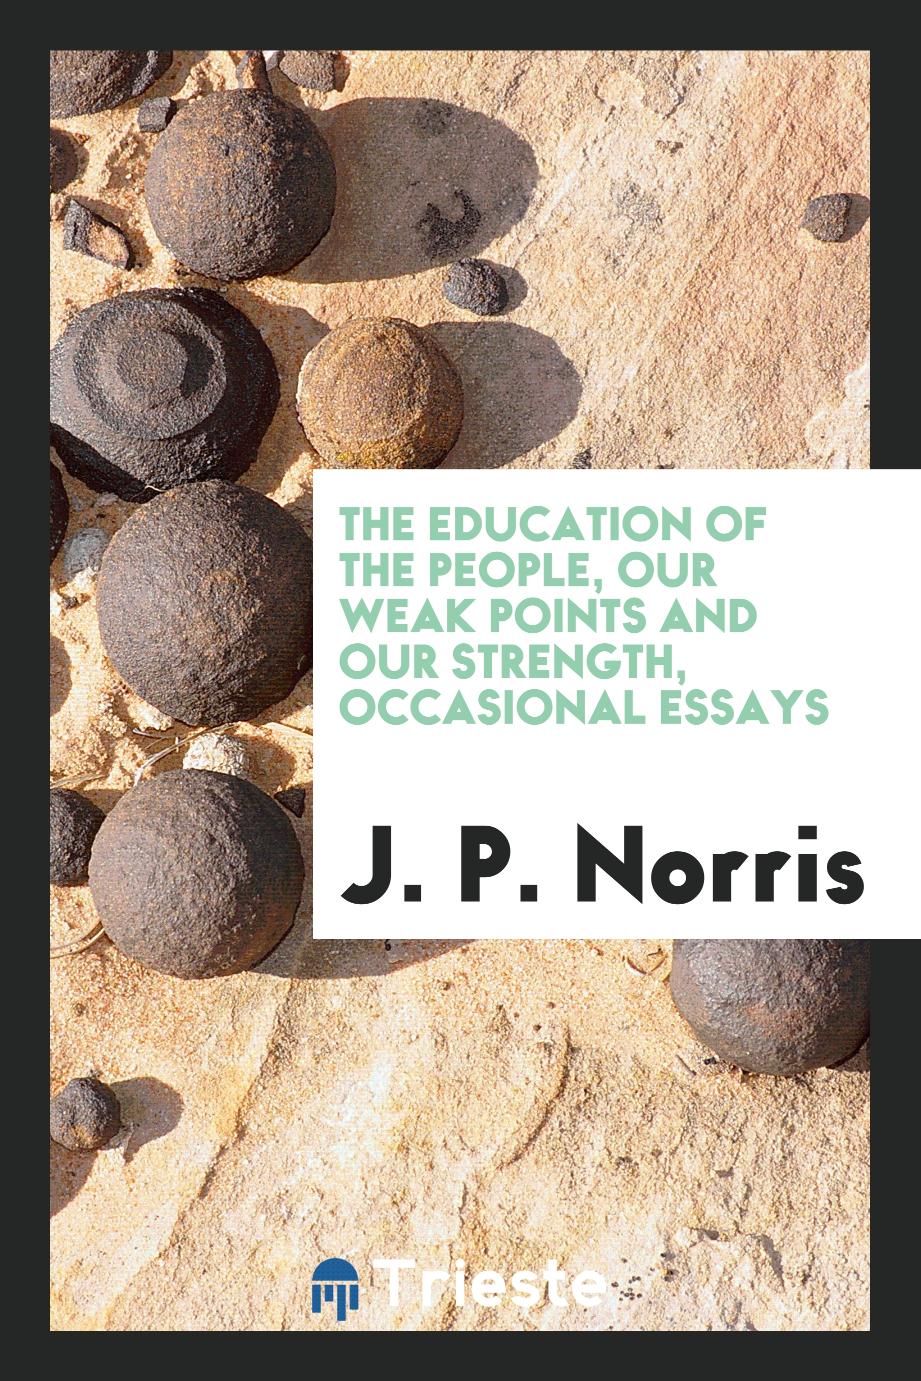 J. P. Norris - The education of the people, our weak points and our strength, occasional essays